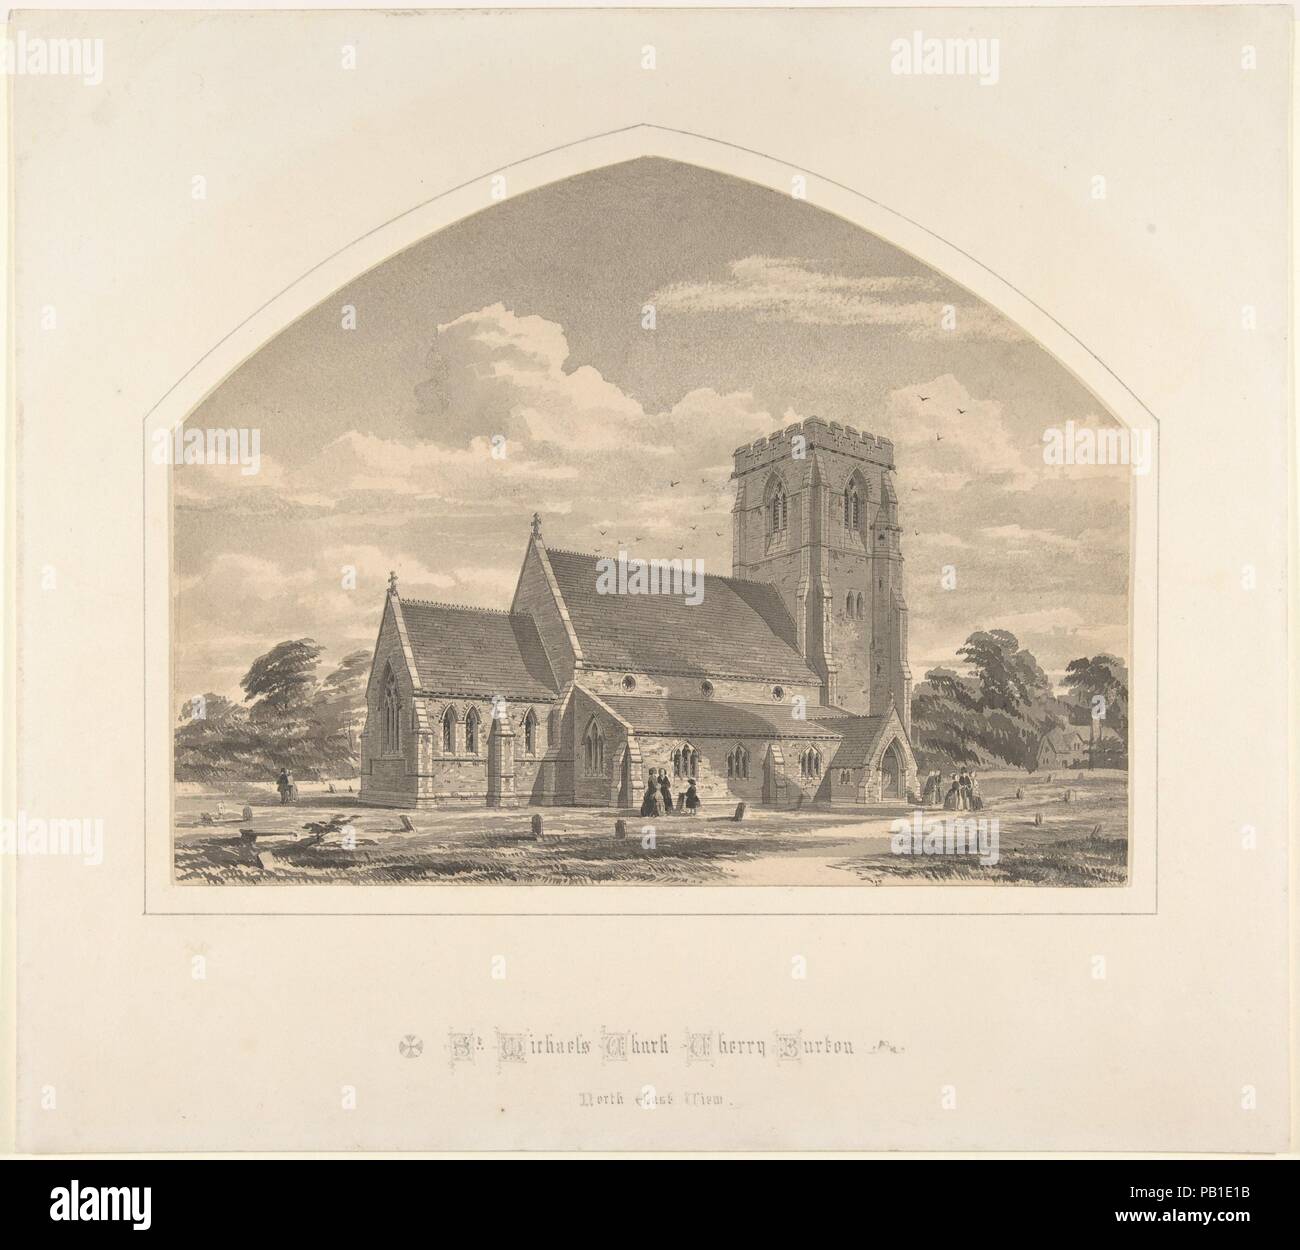 St. Michael's Church, Cherry Burton: North East View. Artist: Sir Horace Jones (British, London 1819-1887 London). Dimensions: sheet (pointed arched top): 8 7/16 x 10 15/16 in. (21.4 x 27.8 cm)  mount: 13 1/8 x 14 9/16 in. (33.3 x 37 cm). Date: 1845-50. Museum: Metropolitan Museum of Art, New York, USA. Stock Photo